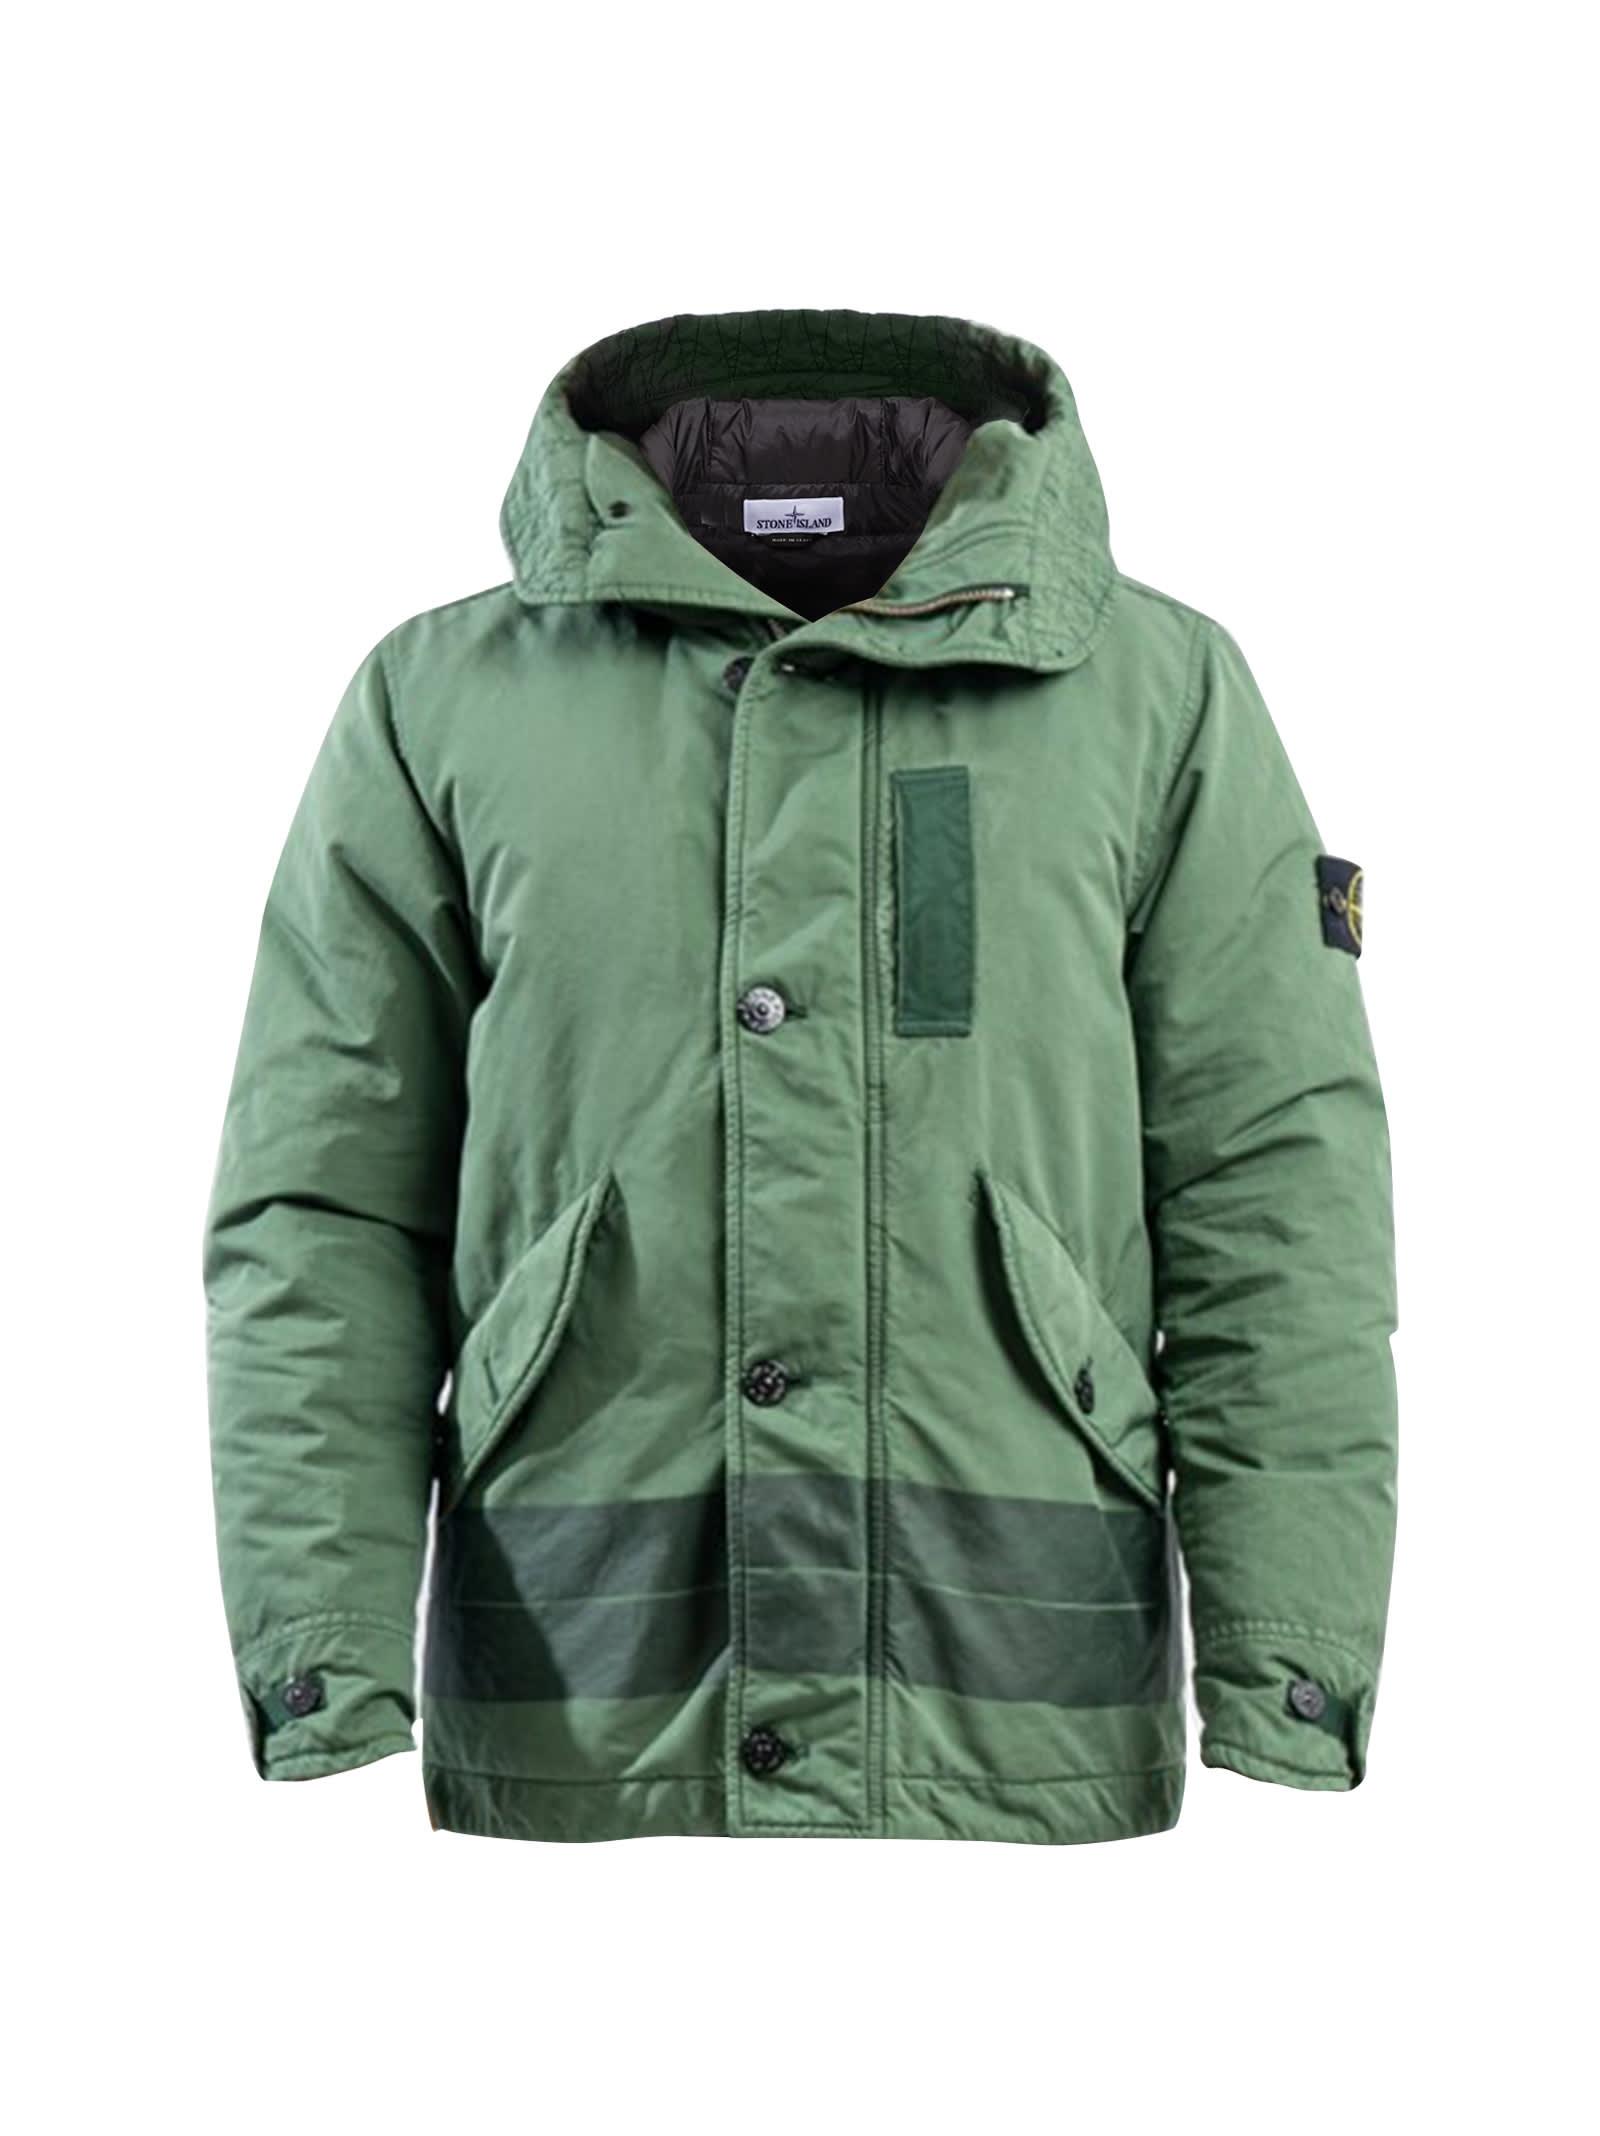 You're welcome twist equator Stone Island Laser Printed David-tc Down Jacket in Green for Men | Lyst UK